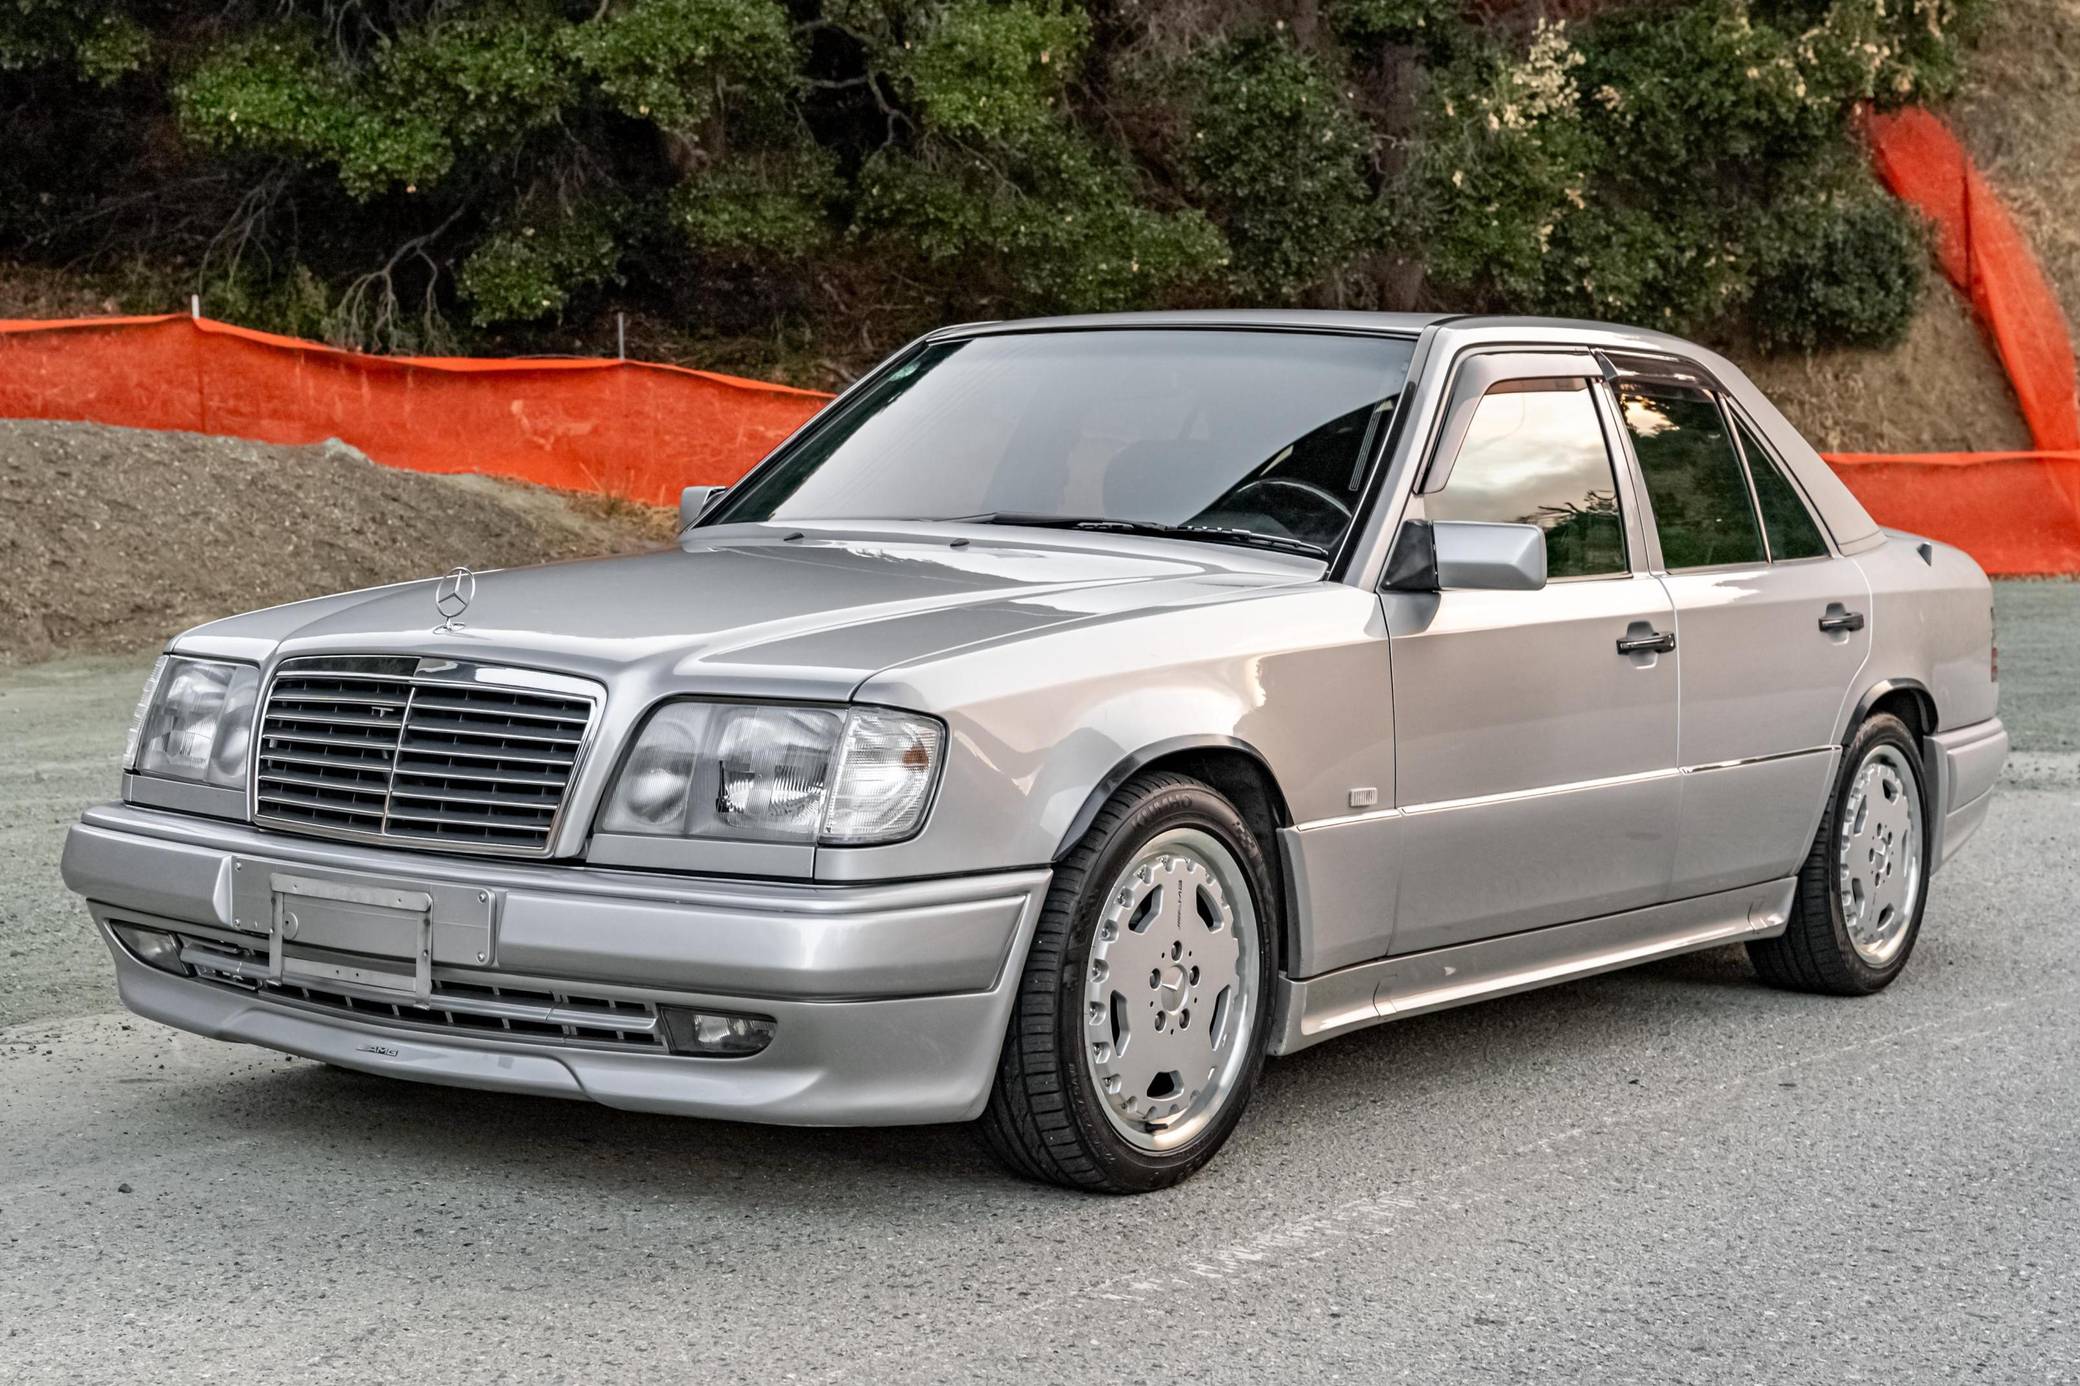 1995 Mercedes-Benz E280 AMG Limited Edition Sedan for Sale - Cars 